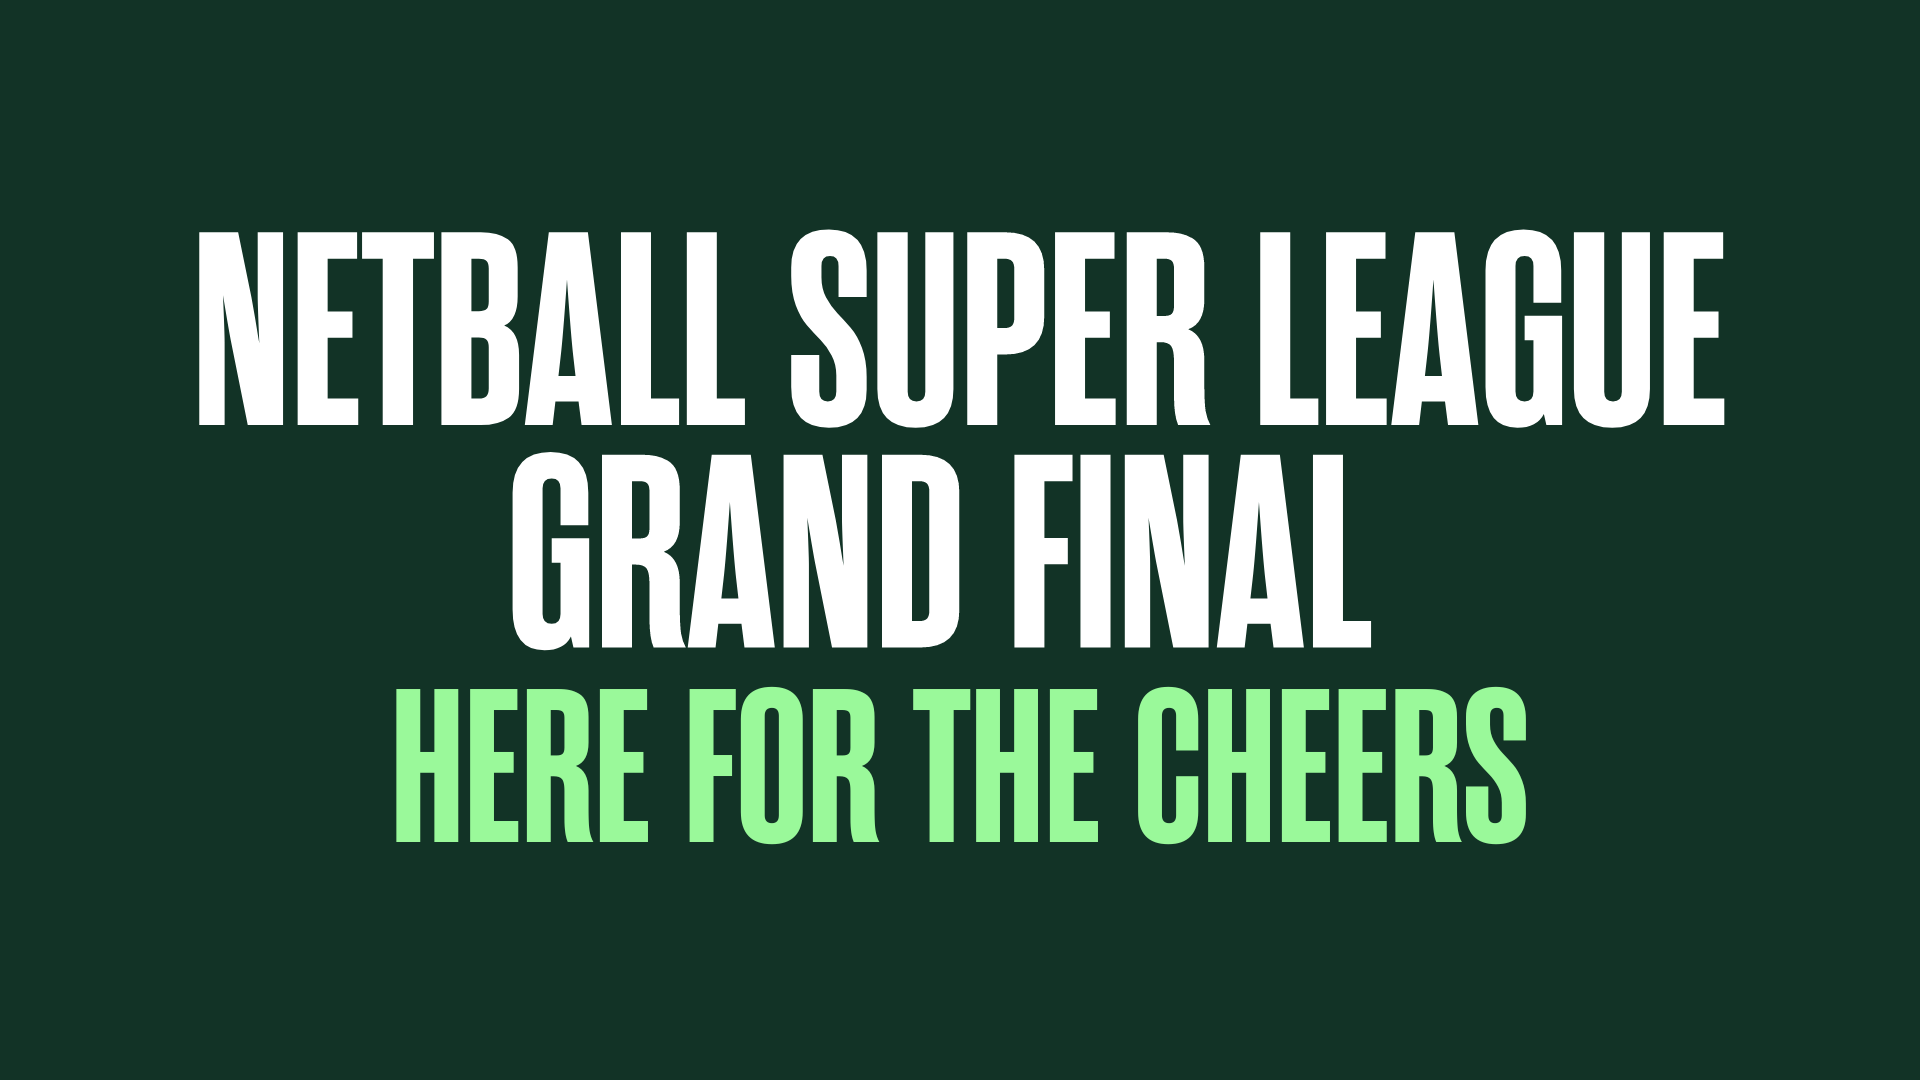 Join us for the Netball Super League Grand Final in Clubhouse 5!